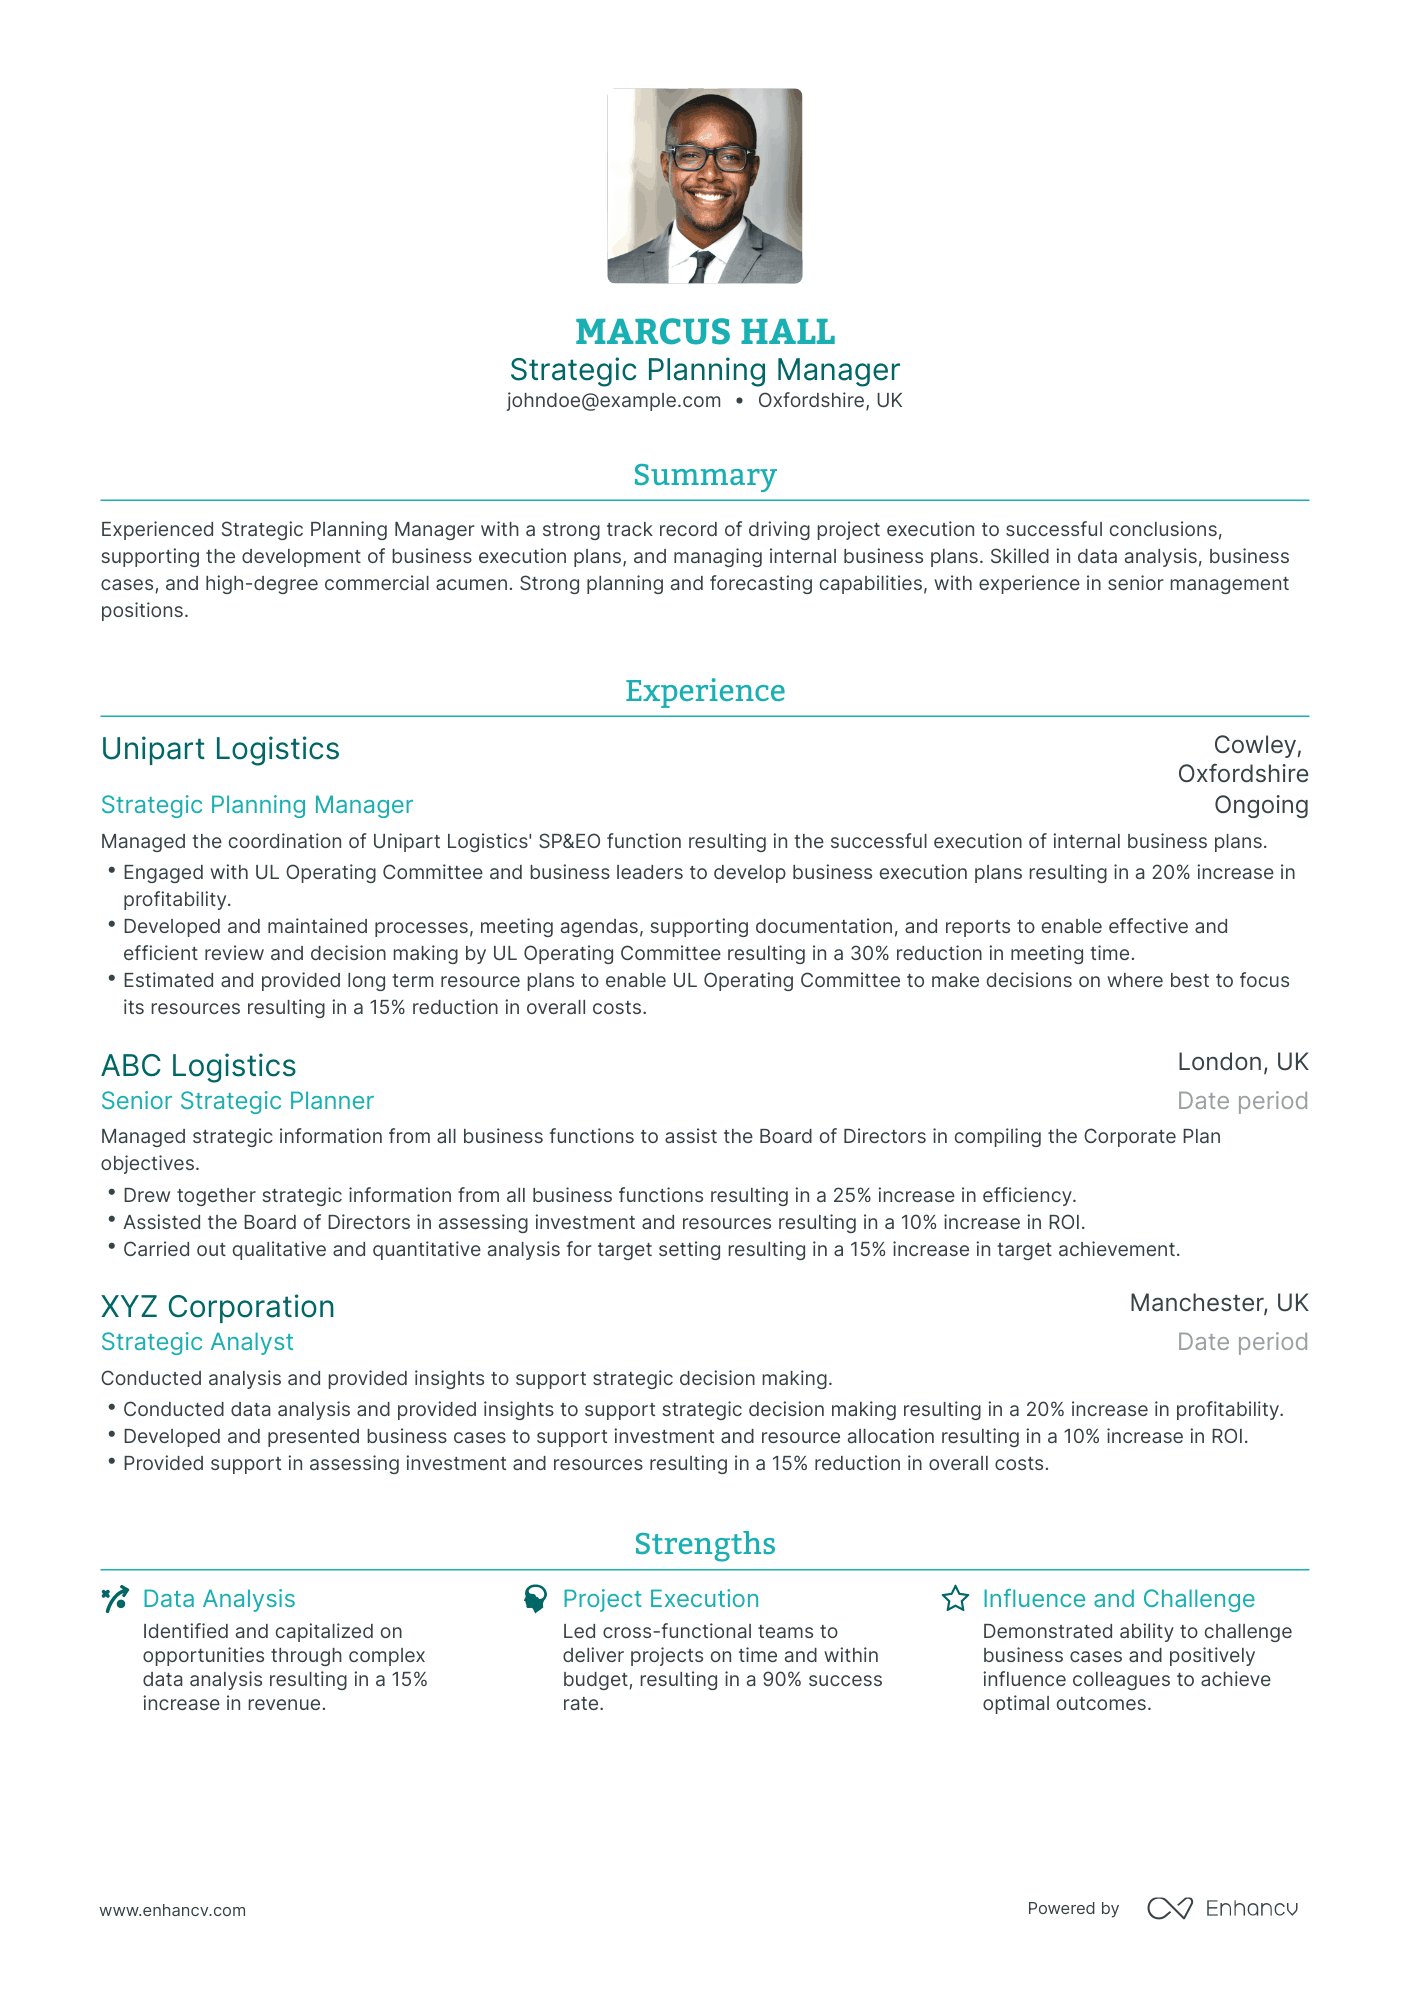 Traditional Strategic Planning Manager Resume Template